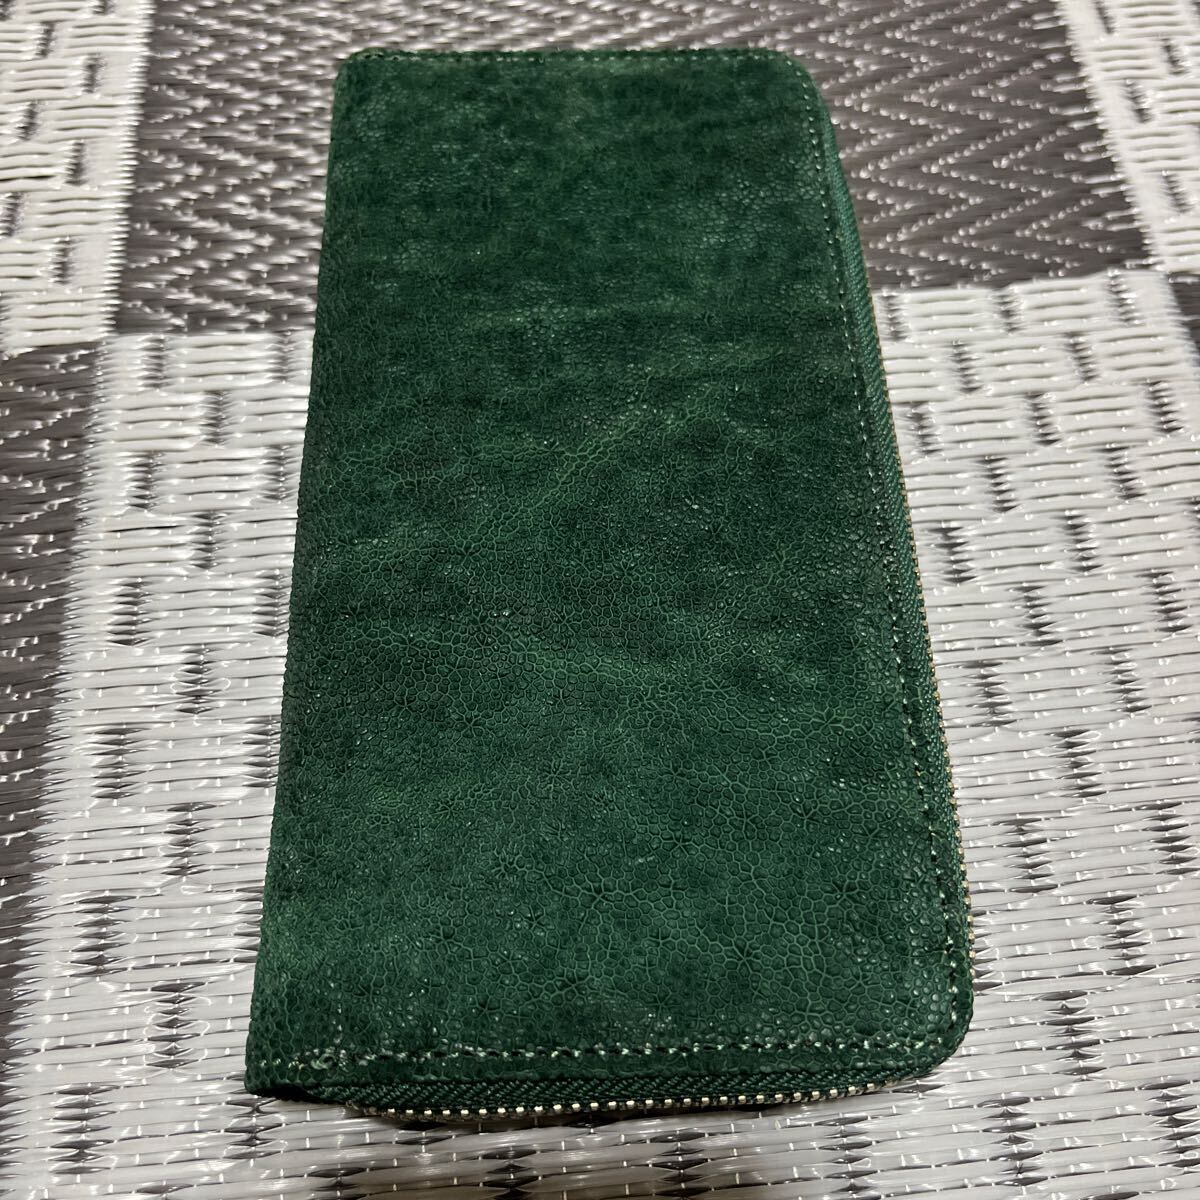 NELD flannel do beautiful goods unused green long wallet Elephant leather . leather limited goods 